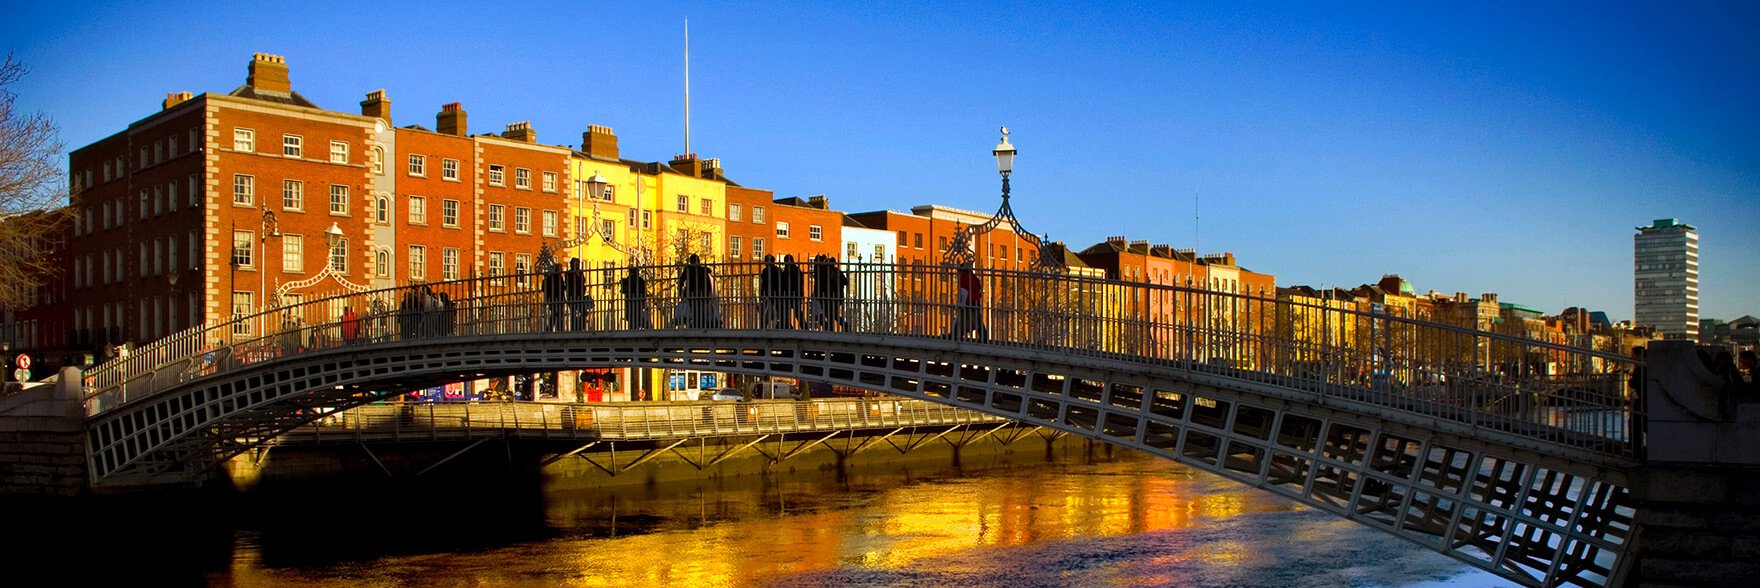 Ha'penny Bridge in Dublin Blog Card for Best Cities in Ireland by Vagabond Tours